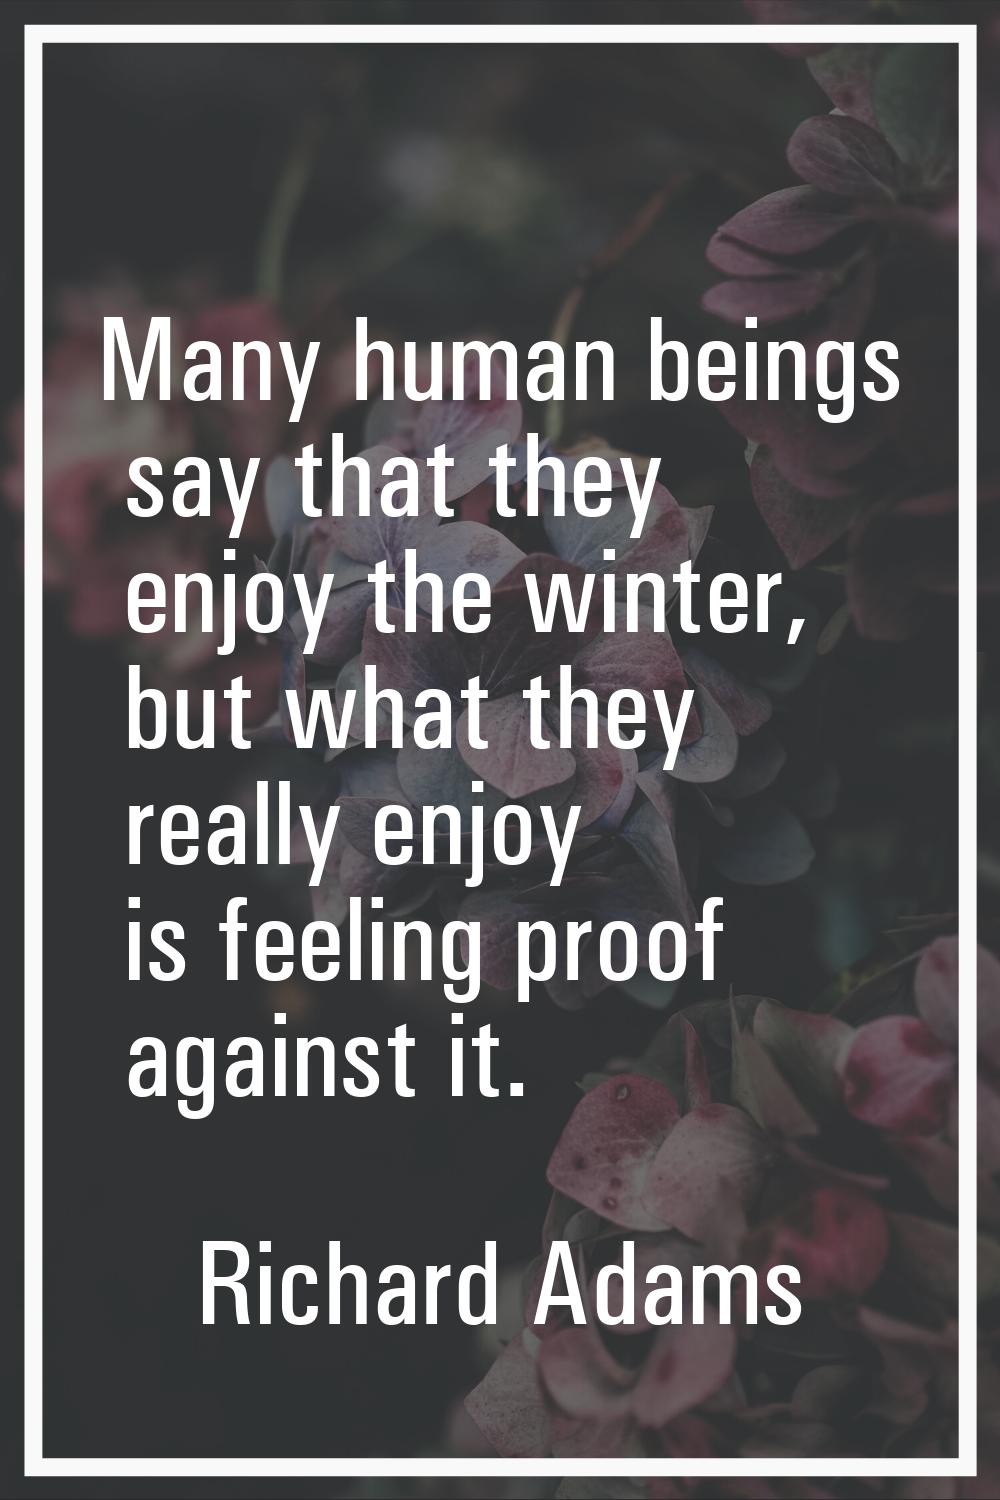 Many human beings say that they enjoy the winter, but what they really enjoy is feeling proof again